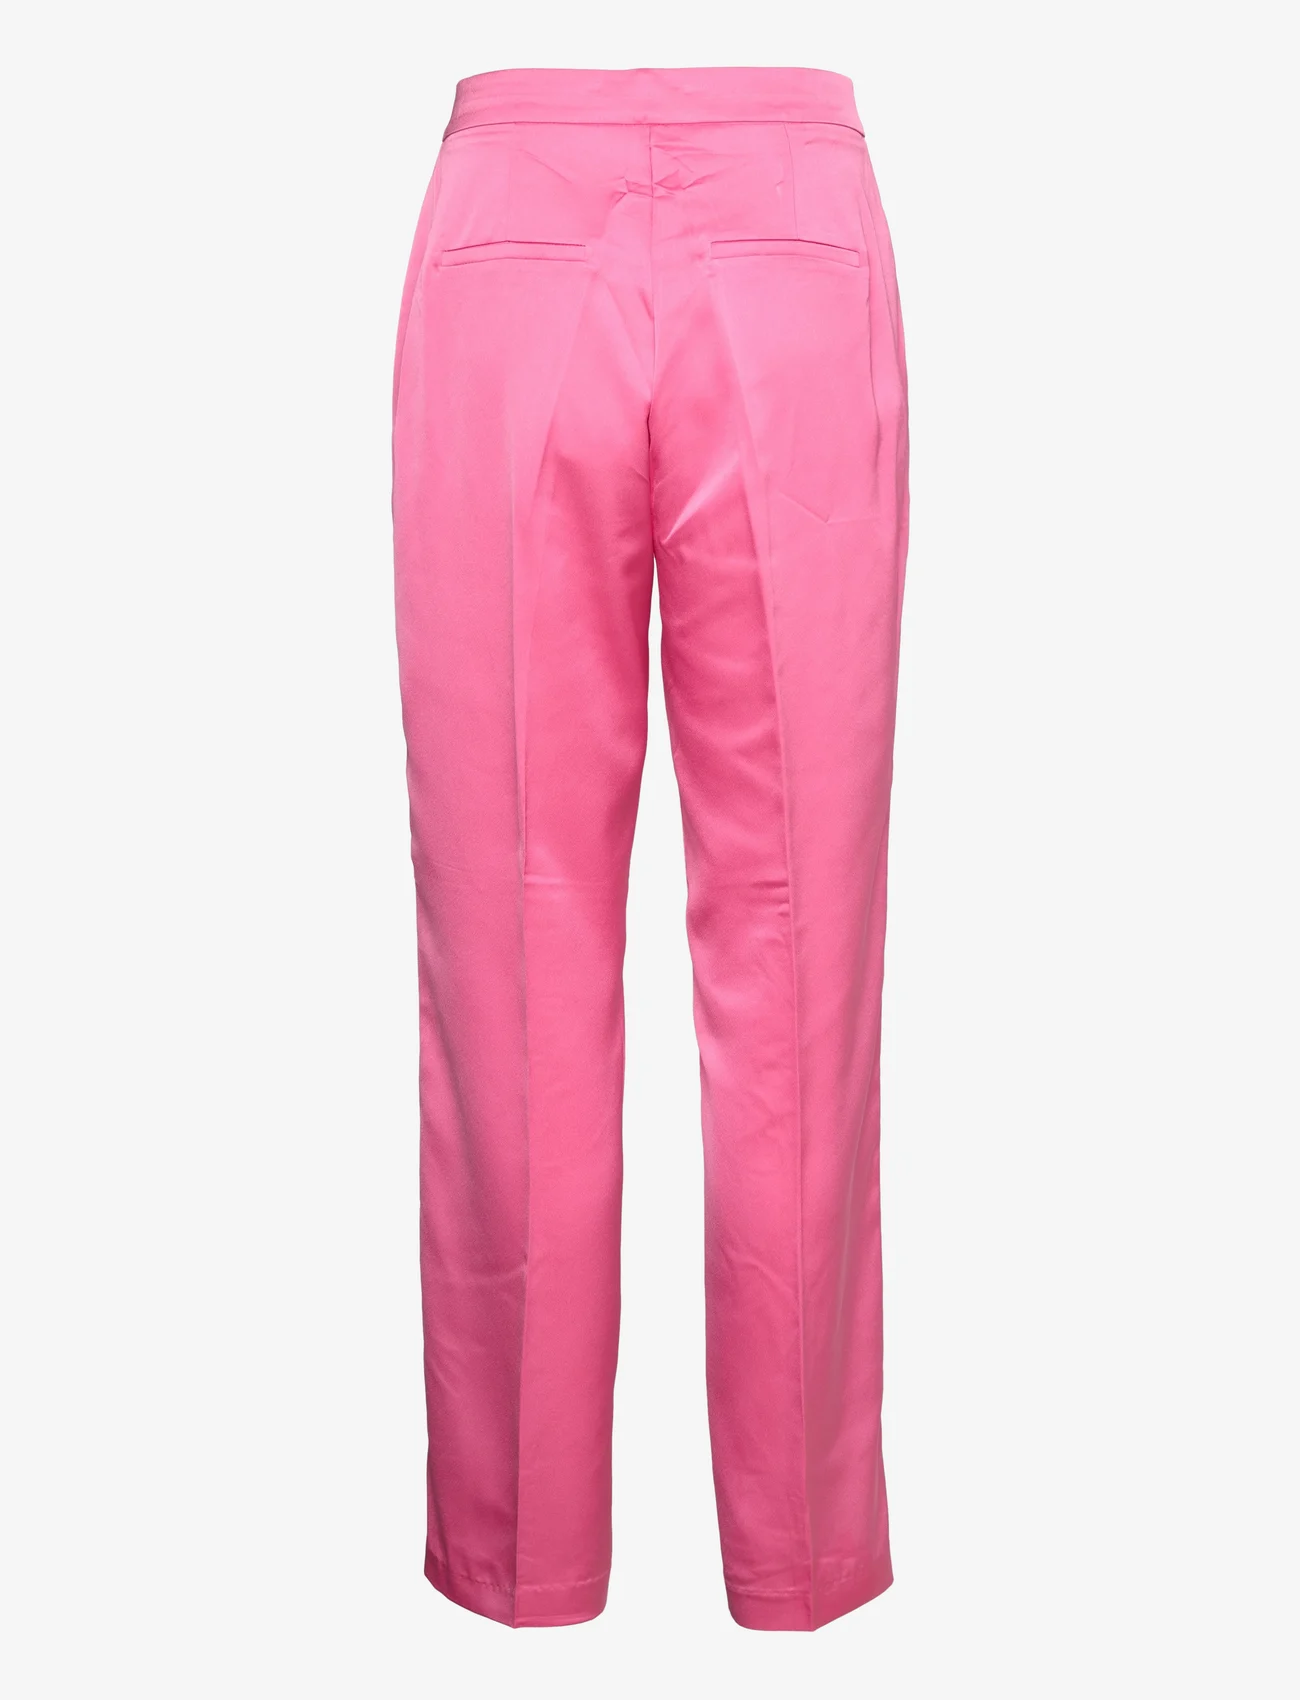 Cras - Samycras Pants - party wear at outlet prices - aurora pink - 1